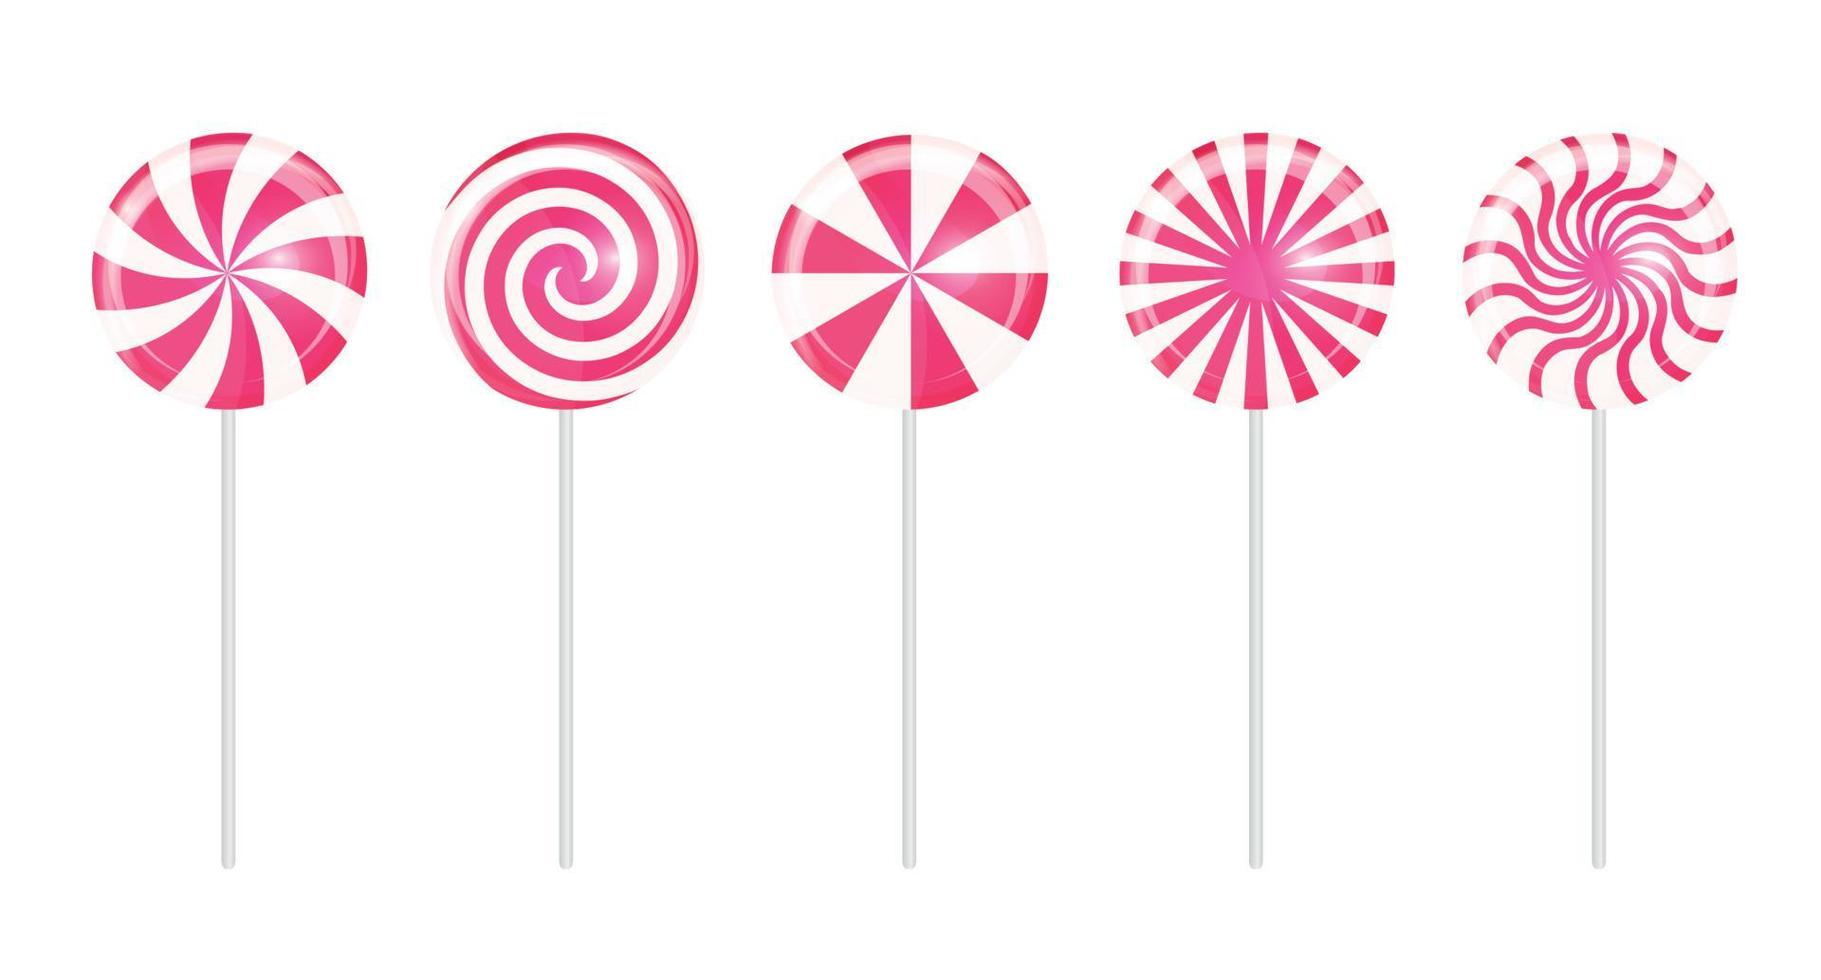 Realistic Sweet Lollipop Candy Set on White Background. Vector Illustration